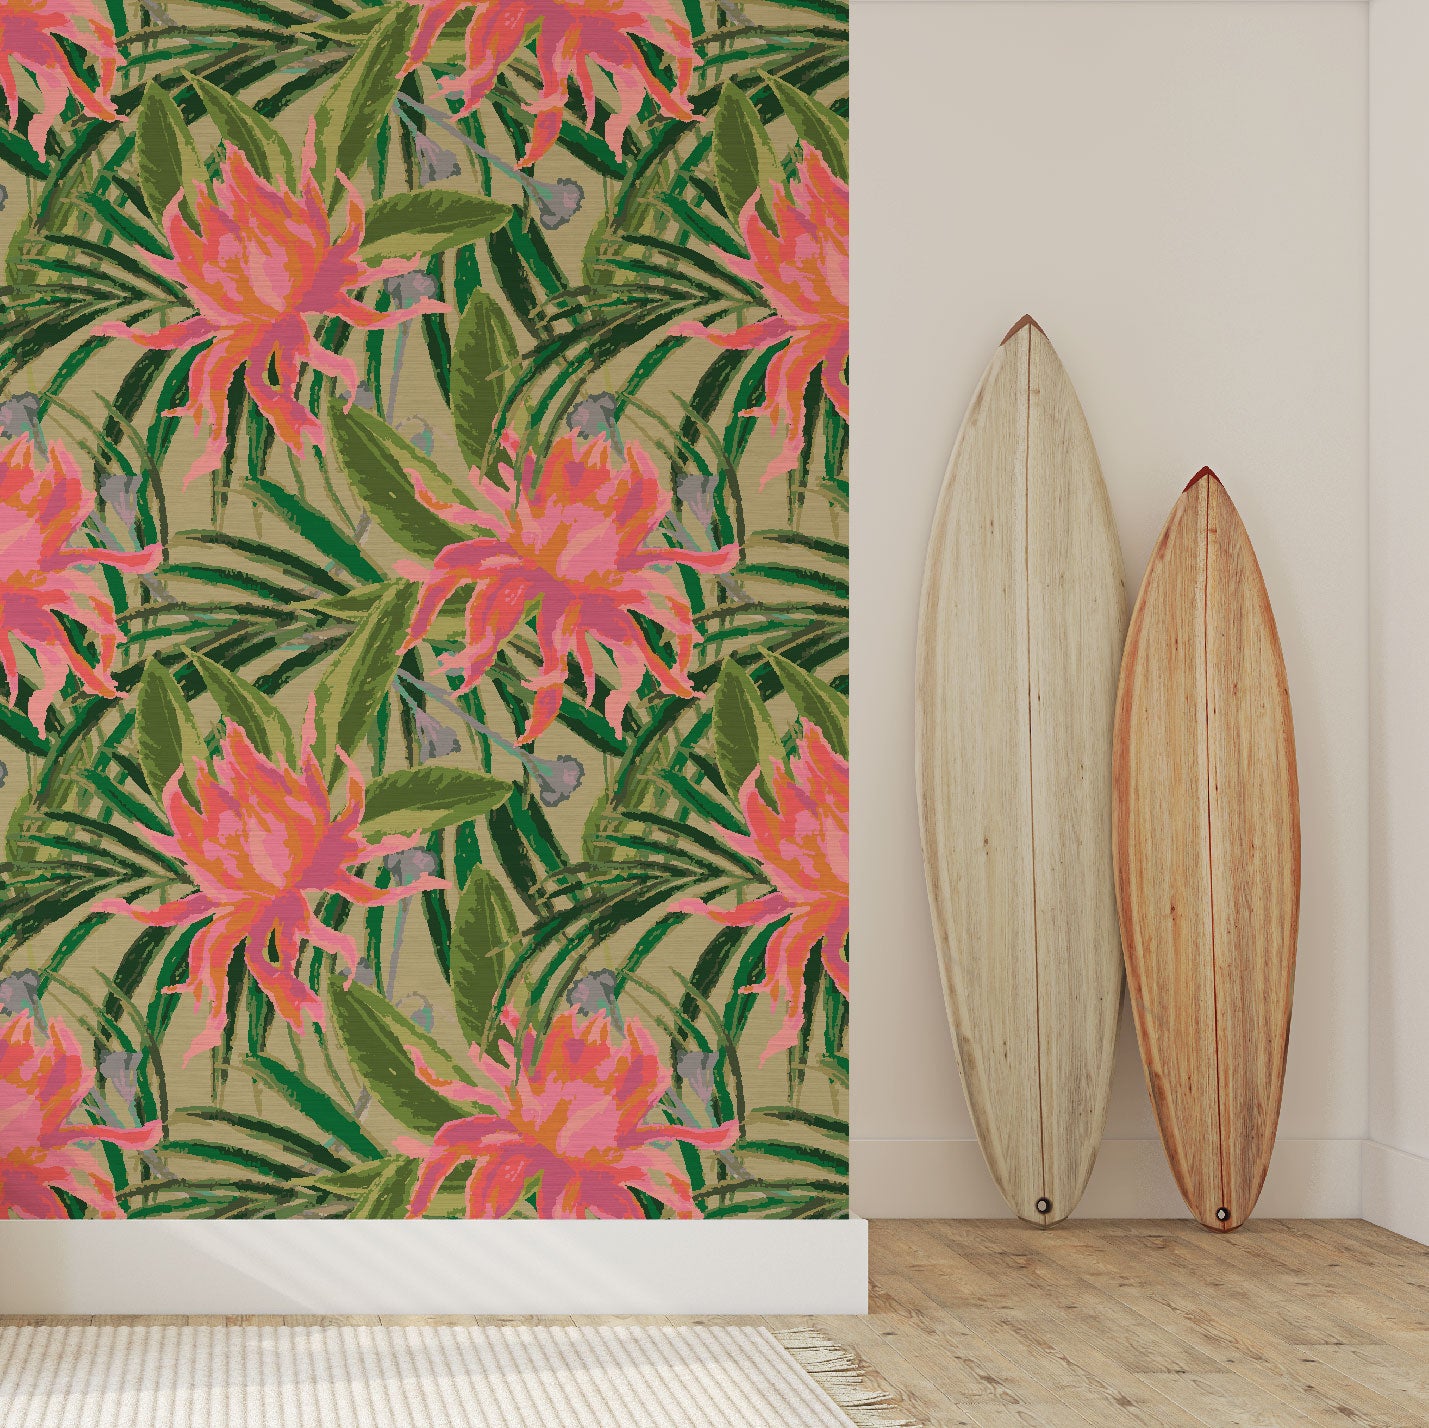 Foyer entrance with grasscloth wallpaper with olive green based featuring oversized painterly tropical flowers and palm leafs in striking shades of pink, orange and lavender and leafs in shades of deep green